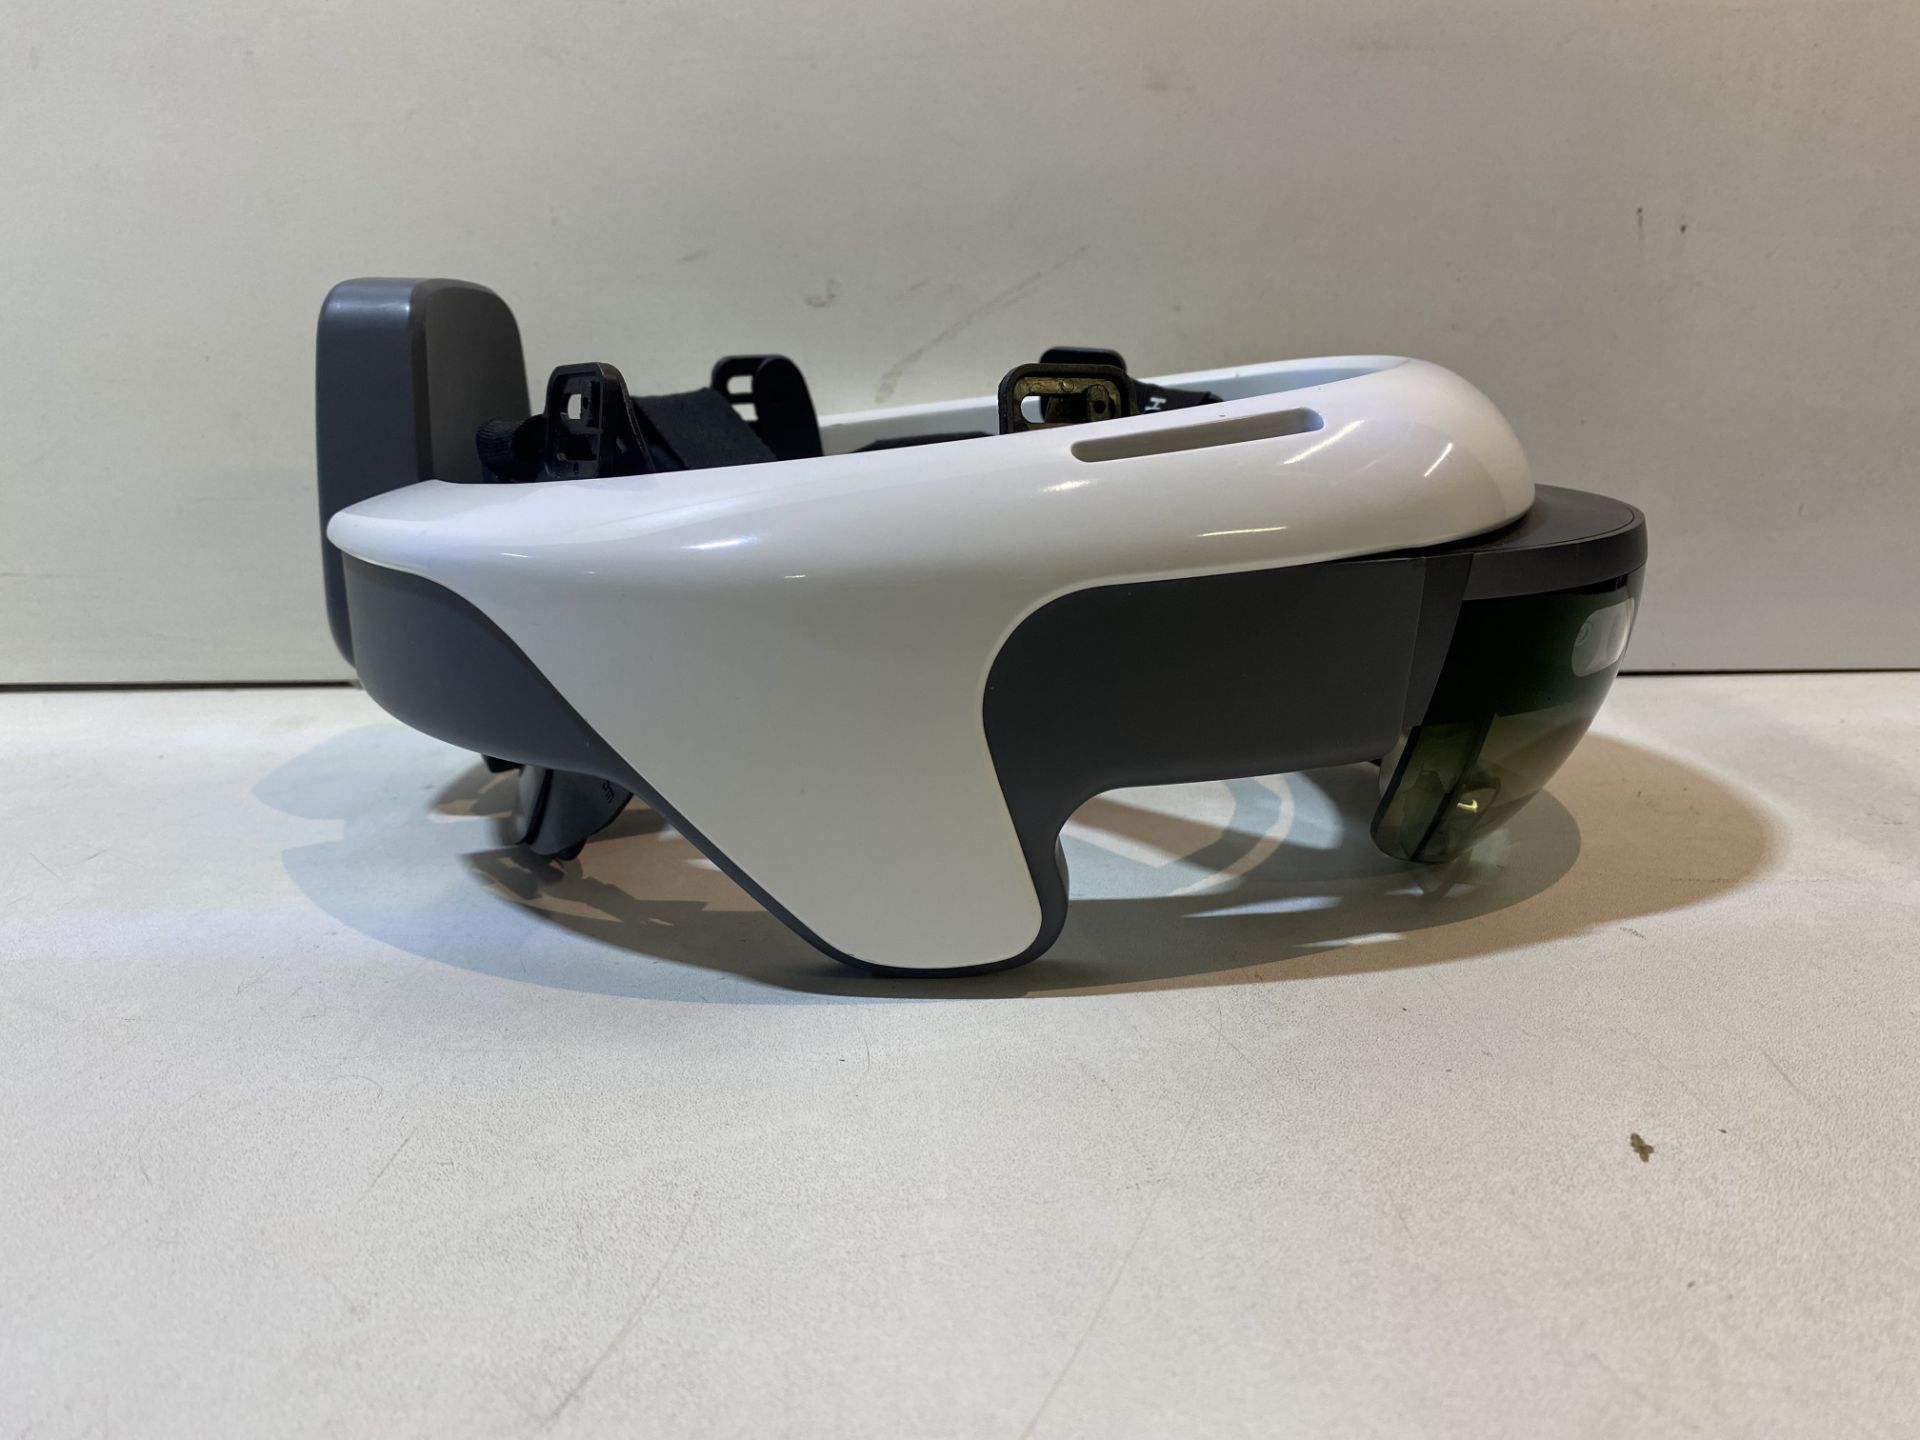 Microsoft HoloLens Holographic Mixed Reality Headset w/ Carry Case - Image 3 of 10